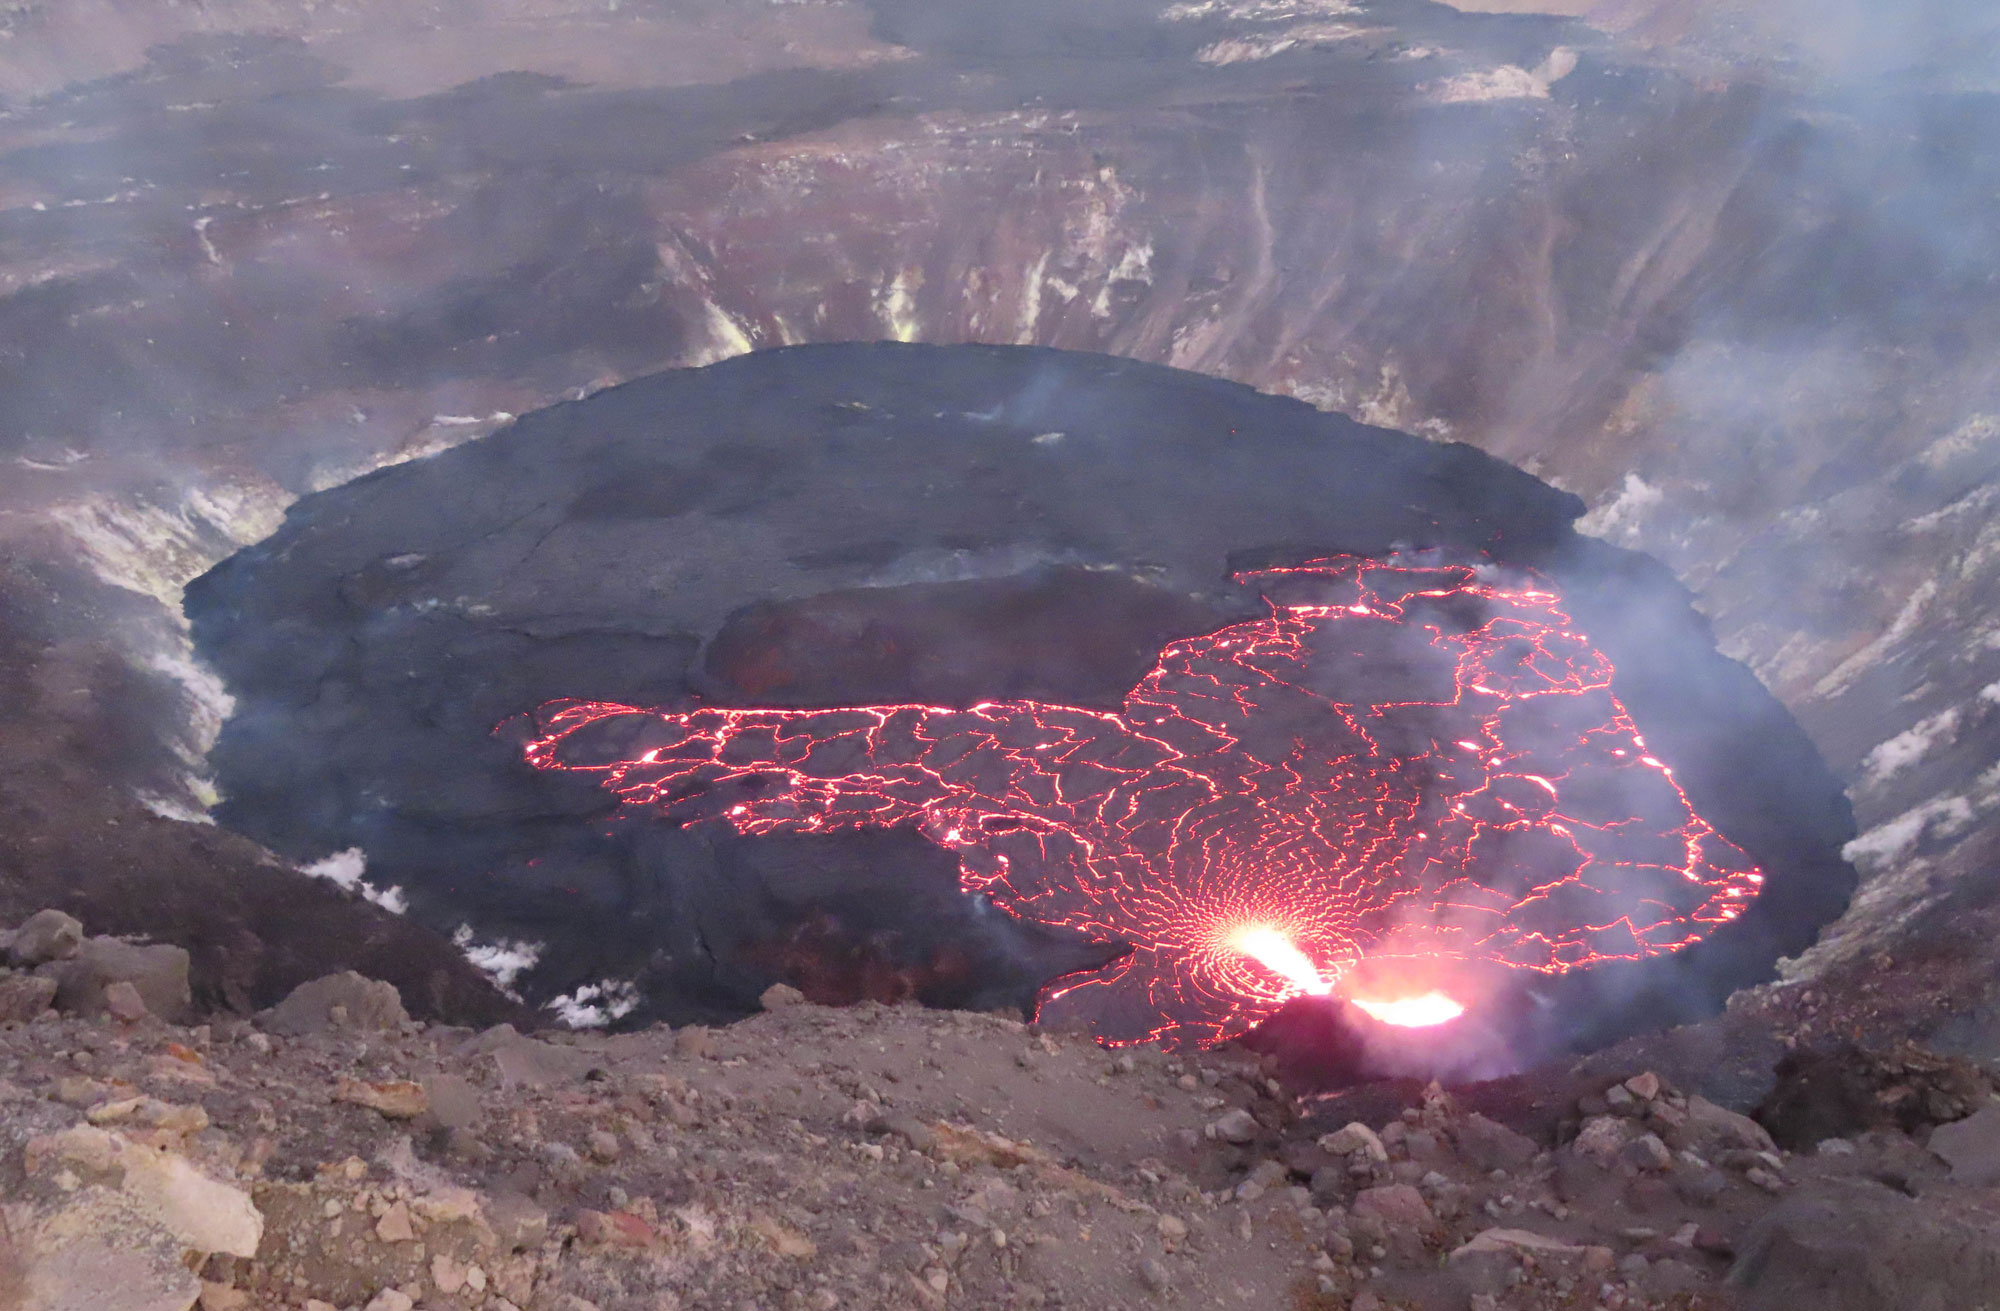 Photograph of a lava lake in Halema'uma'u crater, Kilauea caldera. The photos shows a round lava lake in a steep-sloped pit. The surface of the lake is a dull black color and partially cut by bright orange cracks formed by molten lava.